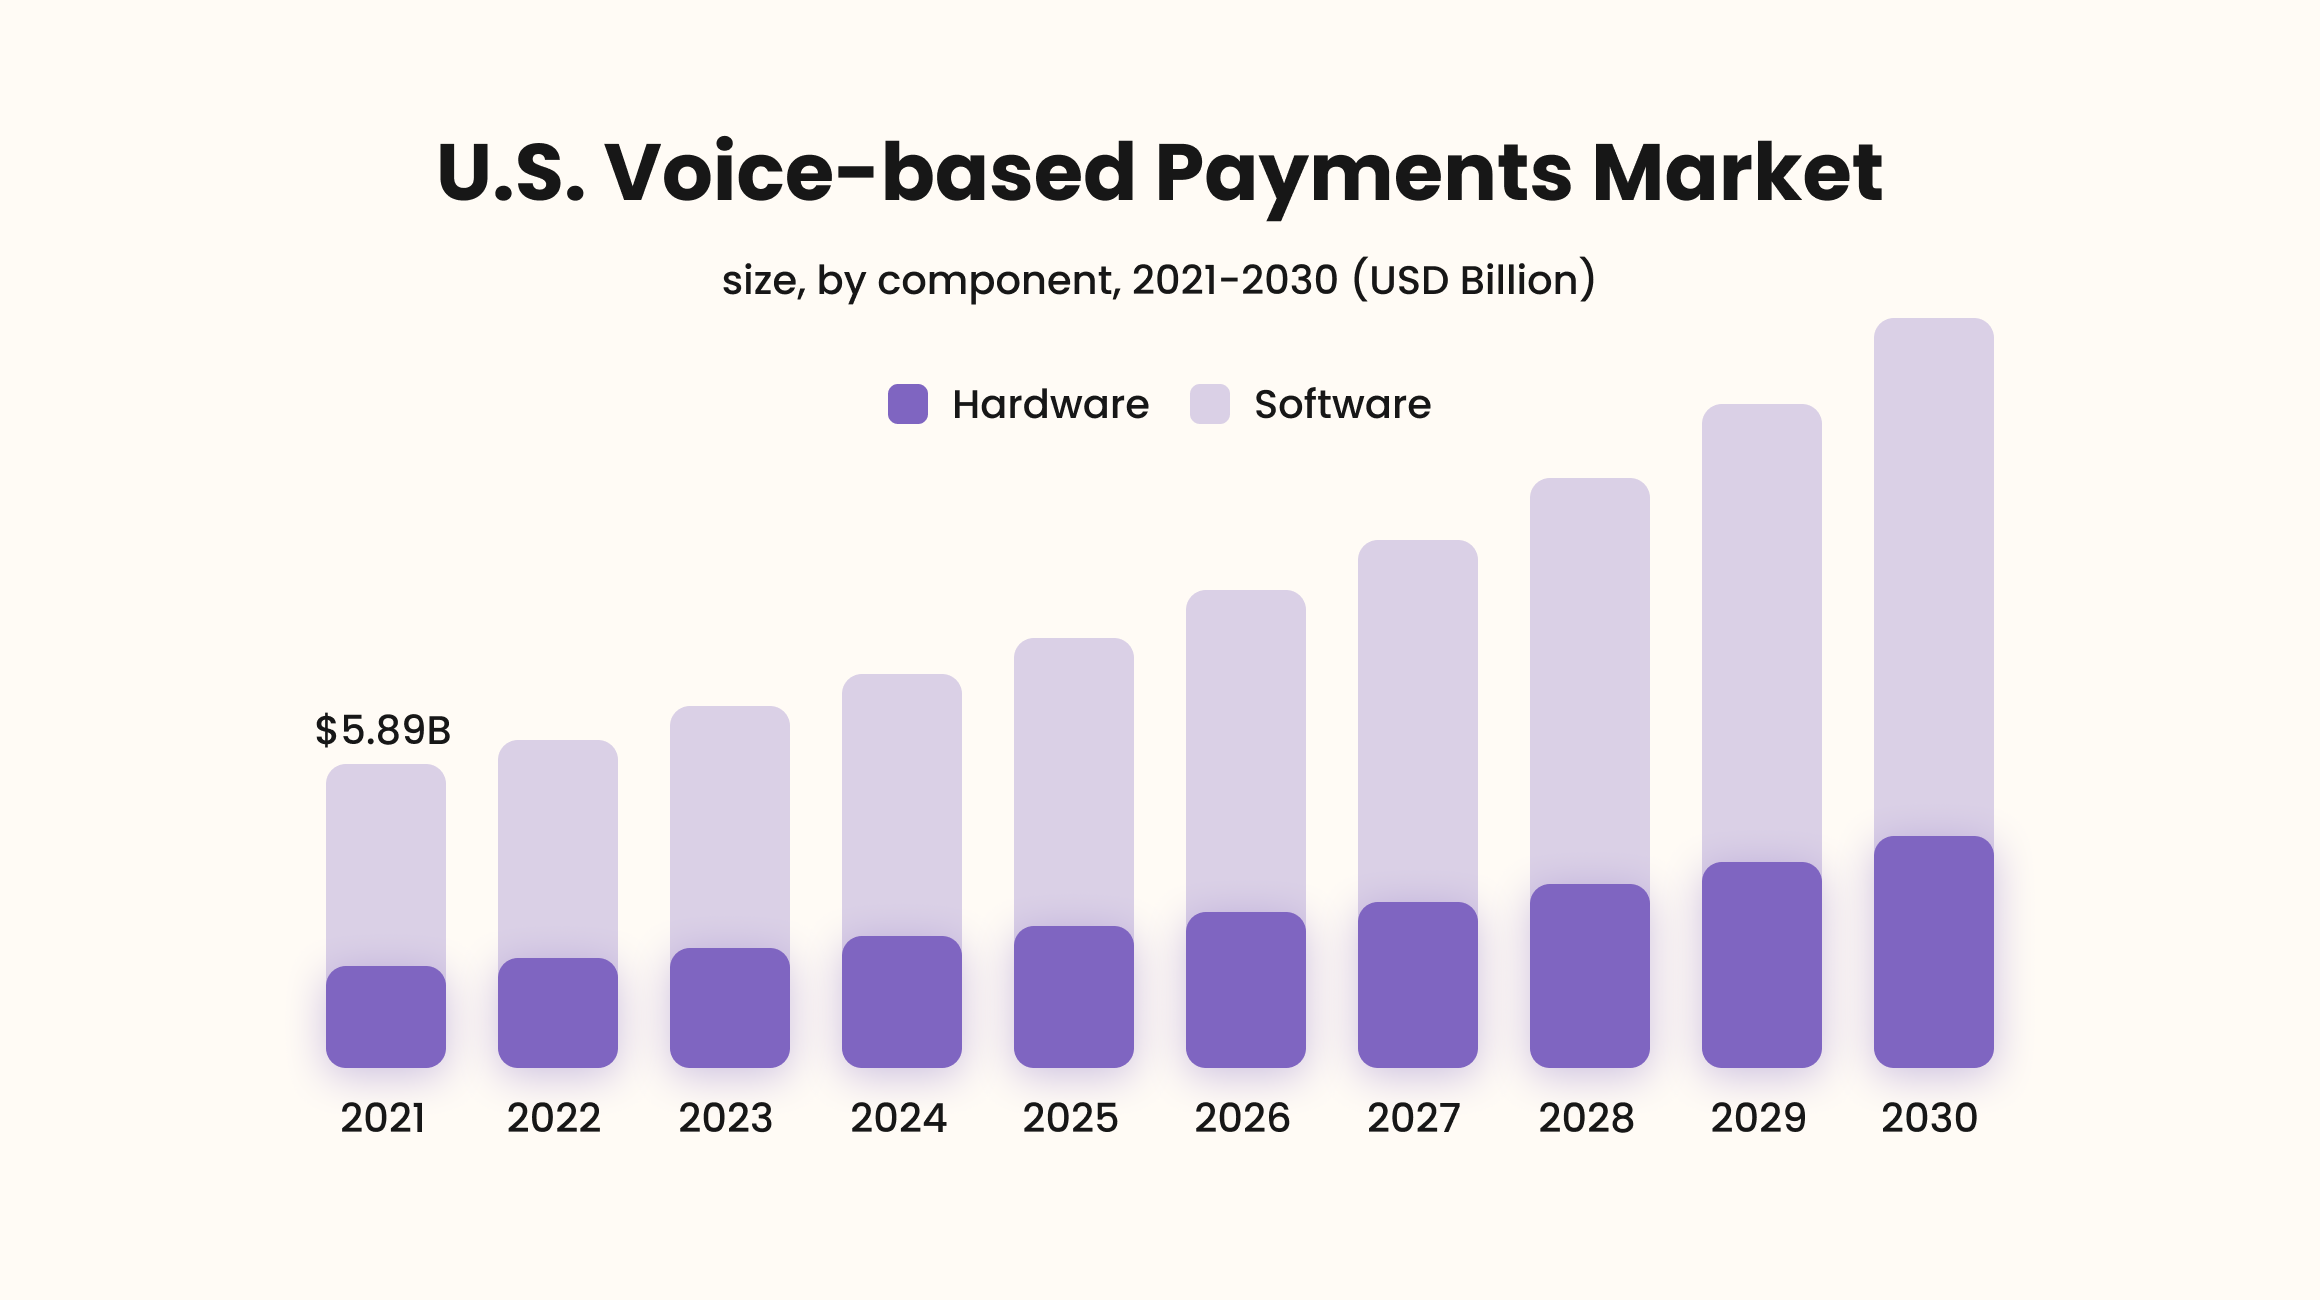 Voice-based payments market